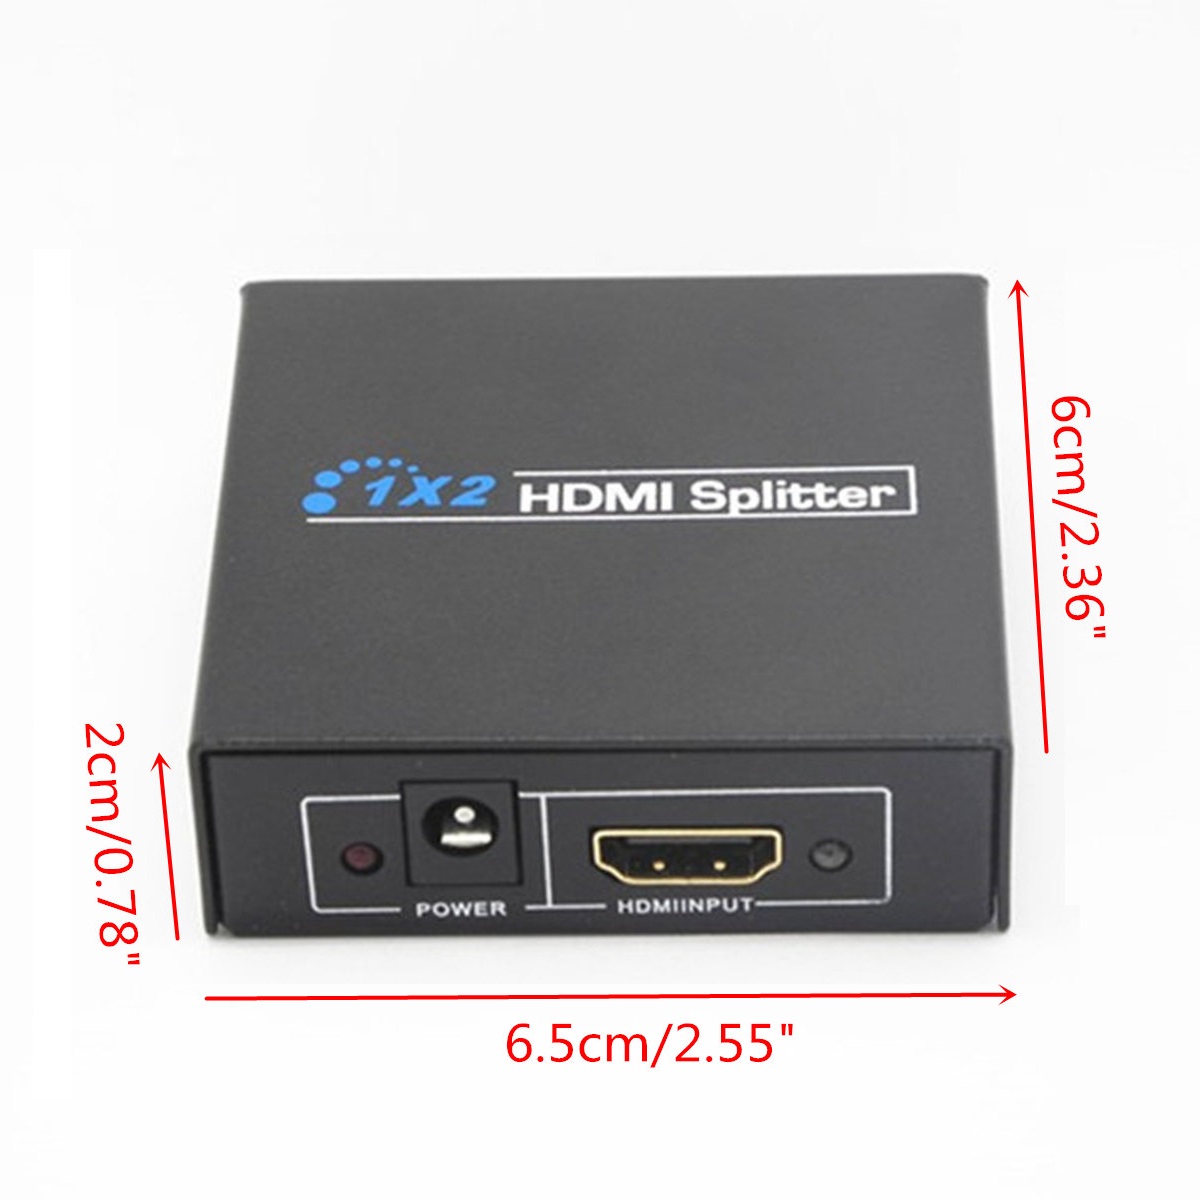 1x2-HDMI-Splitter-v14D-View-HD-One-Input-to-Two-Output-4K-1973024-4